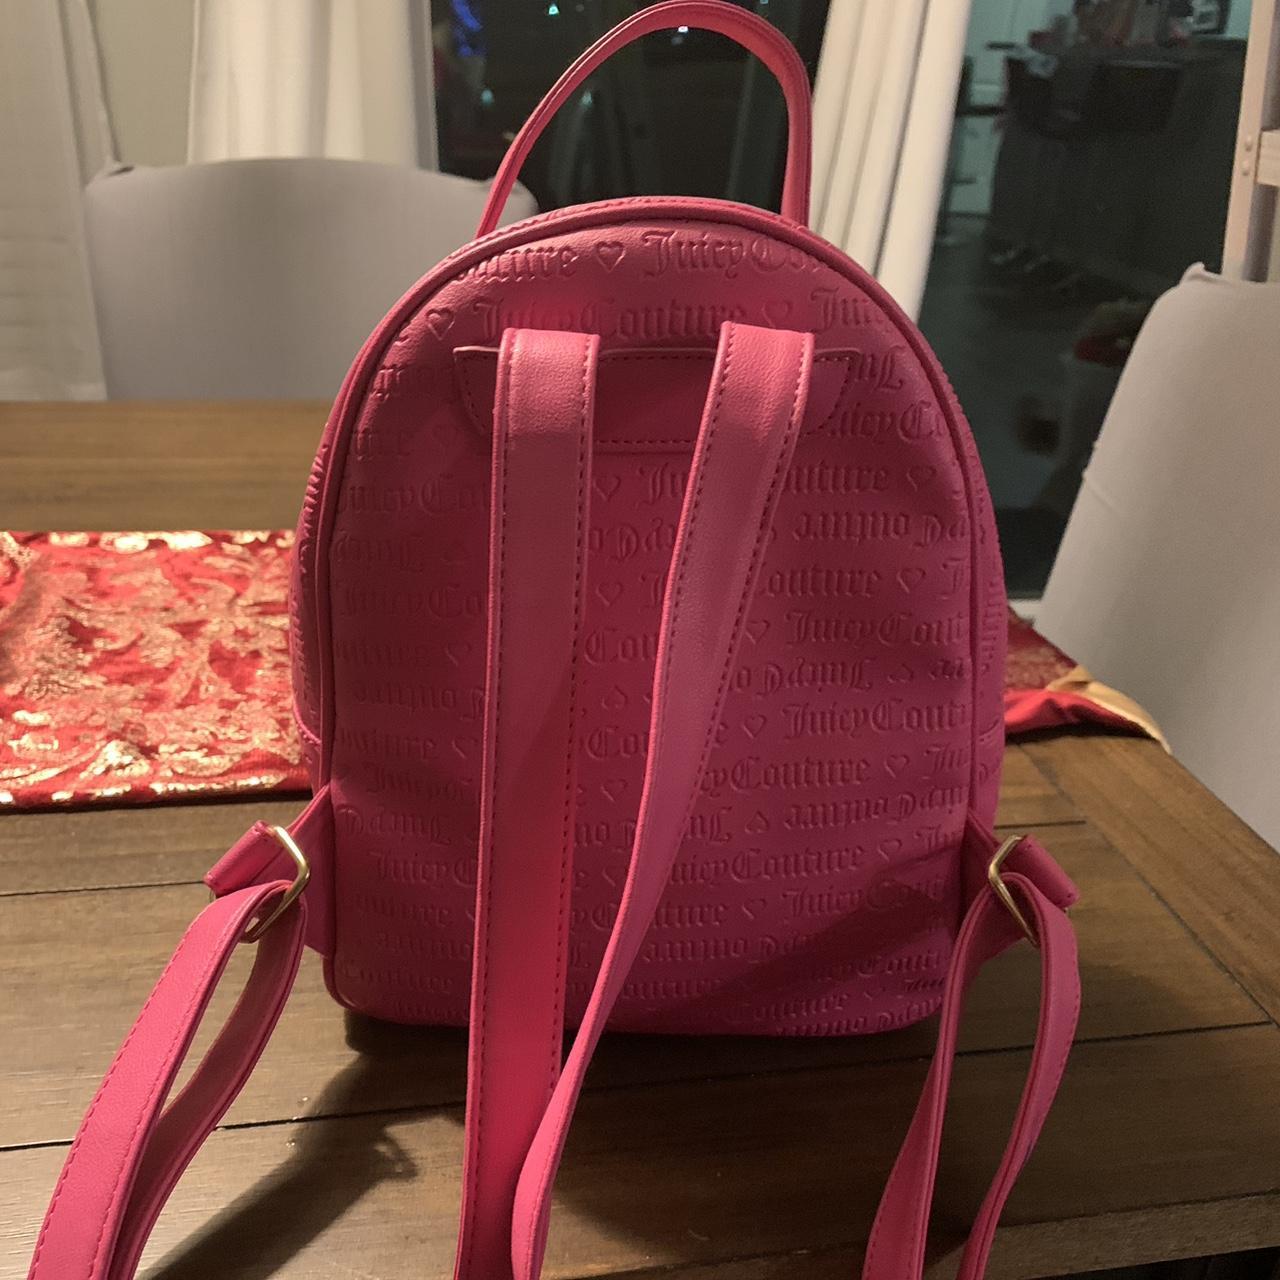 Marc jacobs mini backpack. The nylon is fraying - Depop